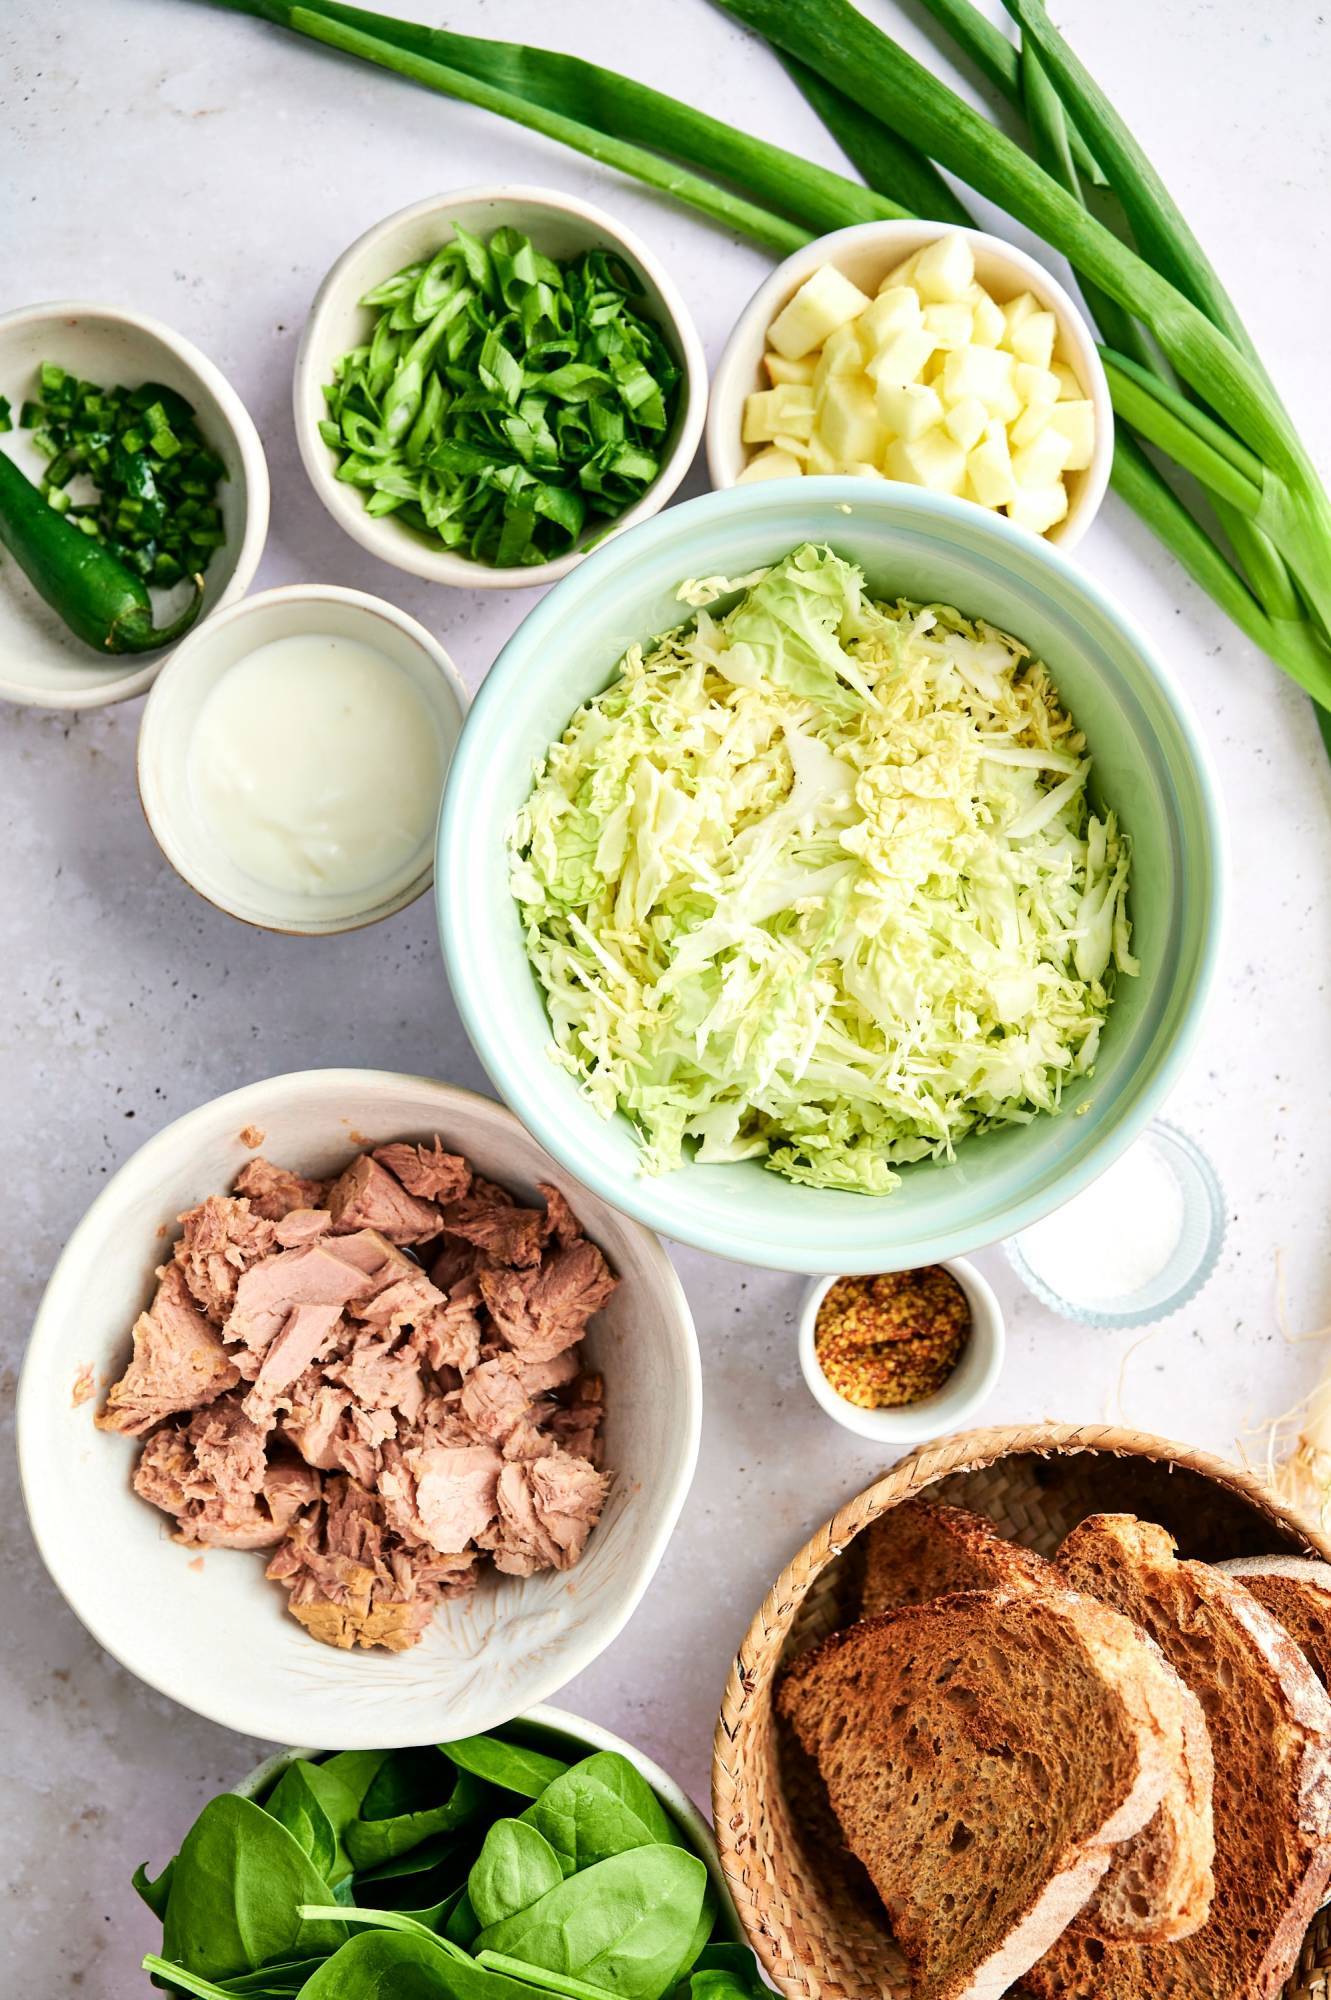 Ingredients for cabbage tuna salad including canned tuna, shredded green cabbage, Greek yogurt, mustard, green onions, and toasted bread.